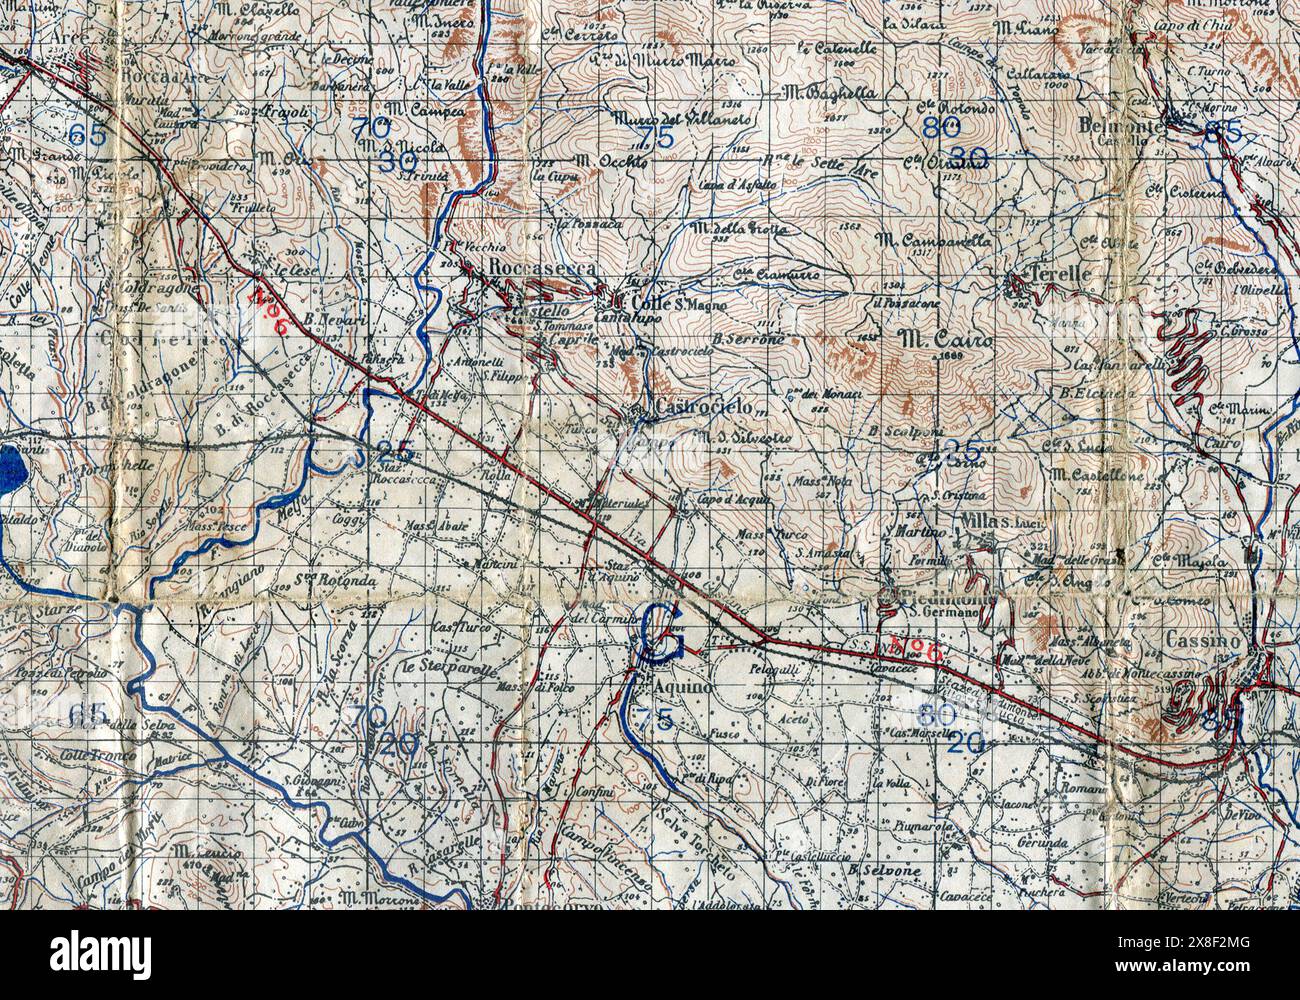 Exerpt of Map Sheet 160 (1:100000) Cassino, Italy from GSGS 4146 Series (Geographical Section General Staff) reproduced by 514 Survey Company, Royal Engineers, April 1944. This section illustrates the operational area for 6th Armoured Division during April and May 1944. Stock Photo